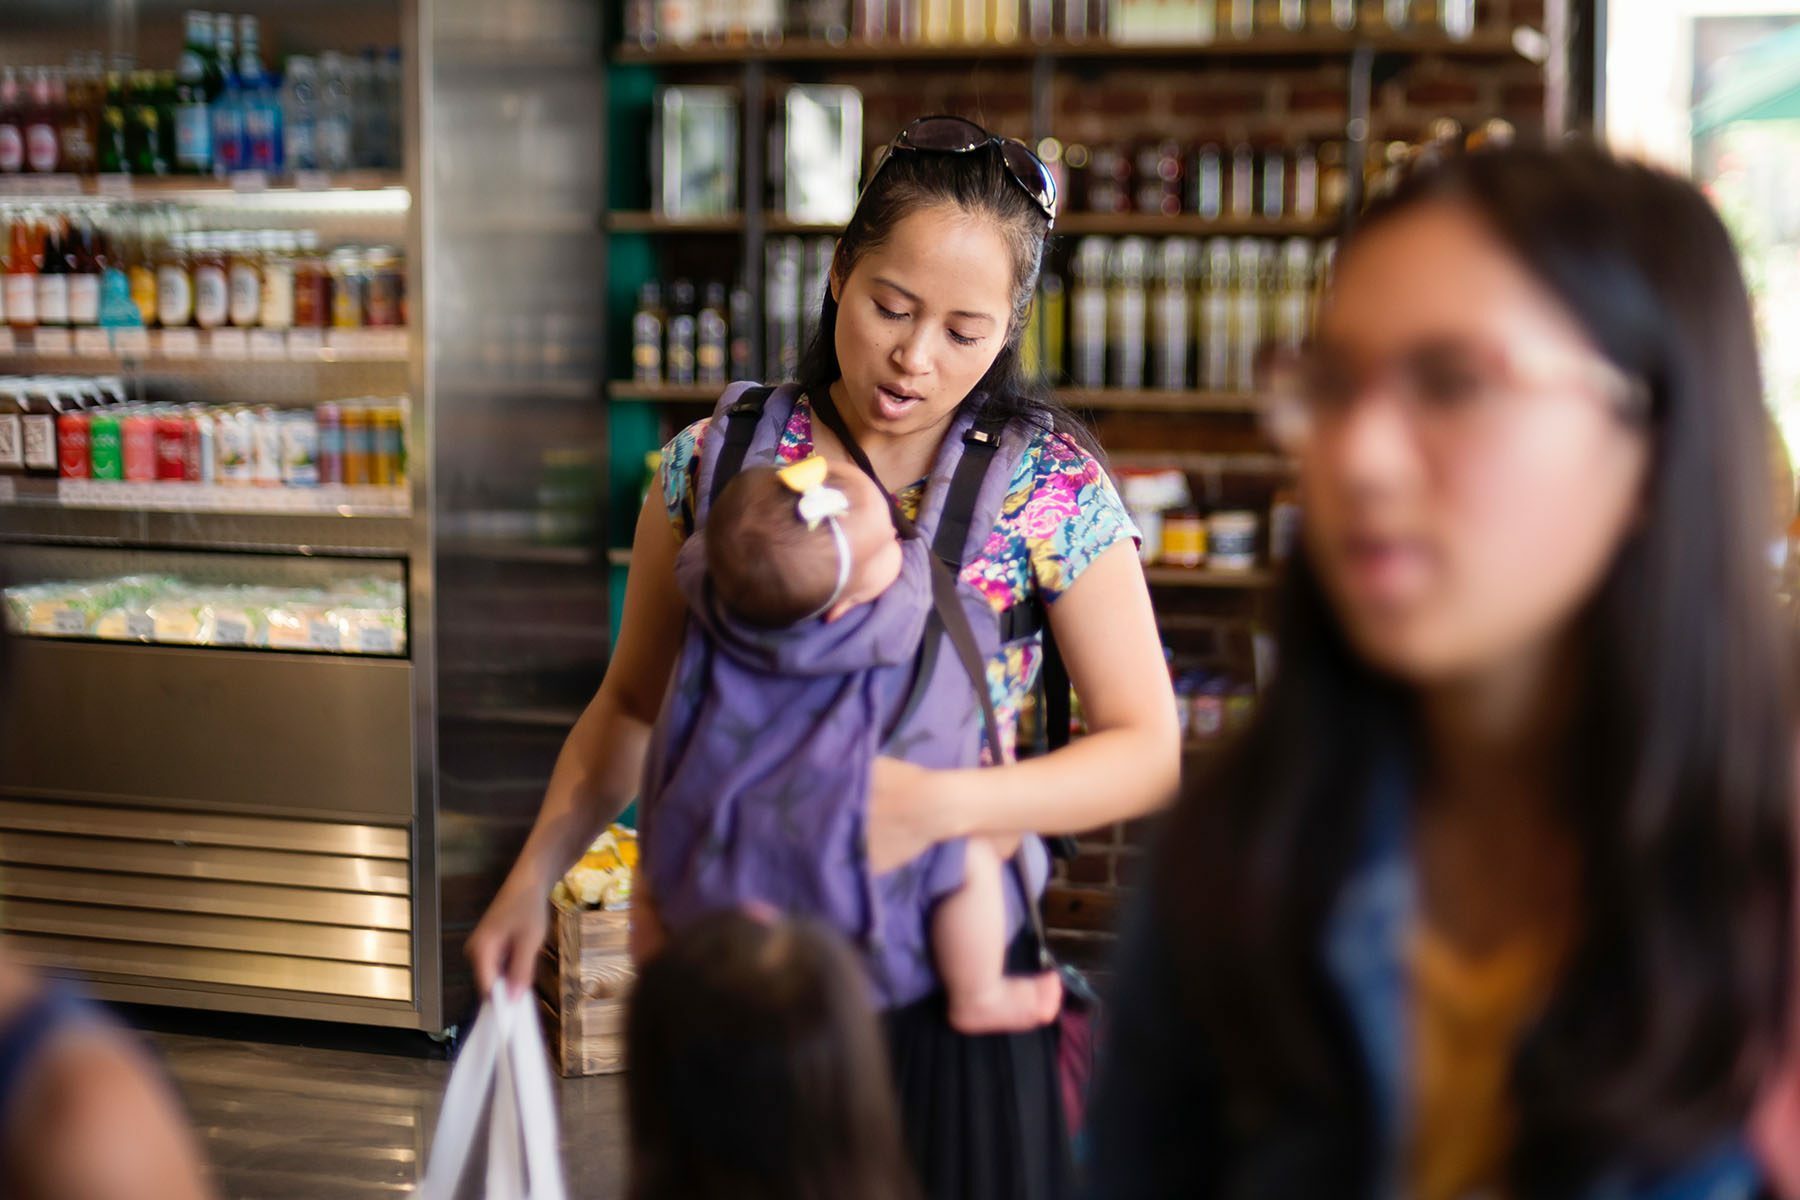 A mother with a baby in a carrier on her chest shops for groceries.